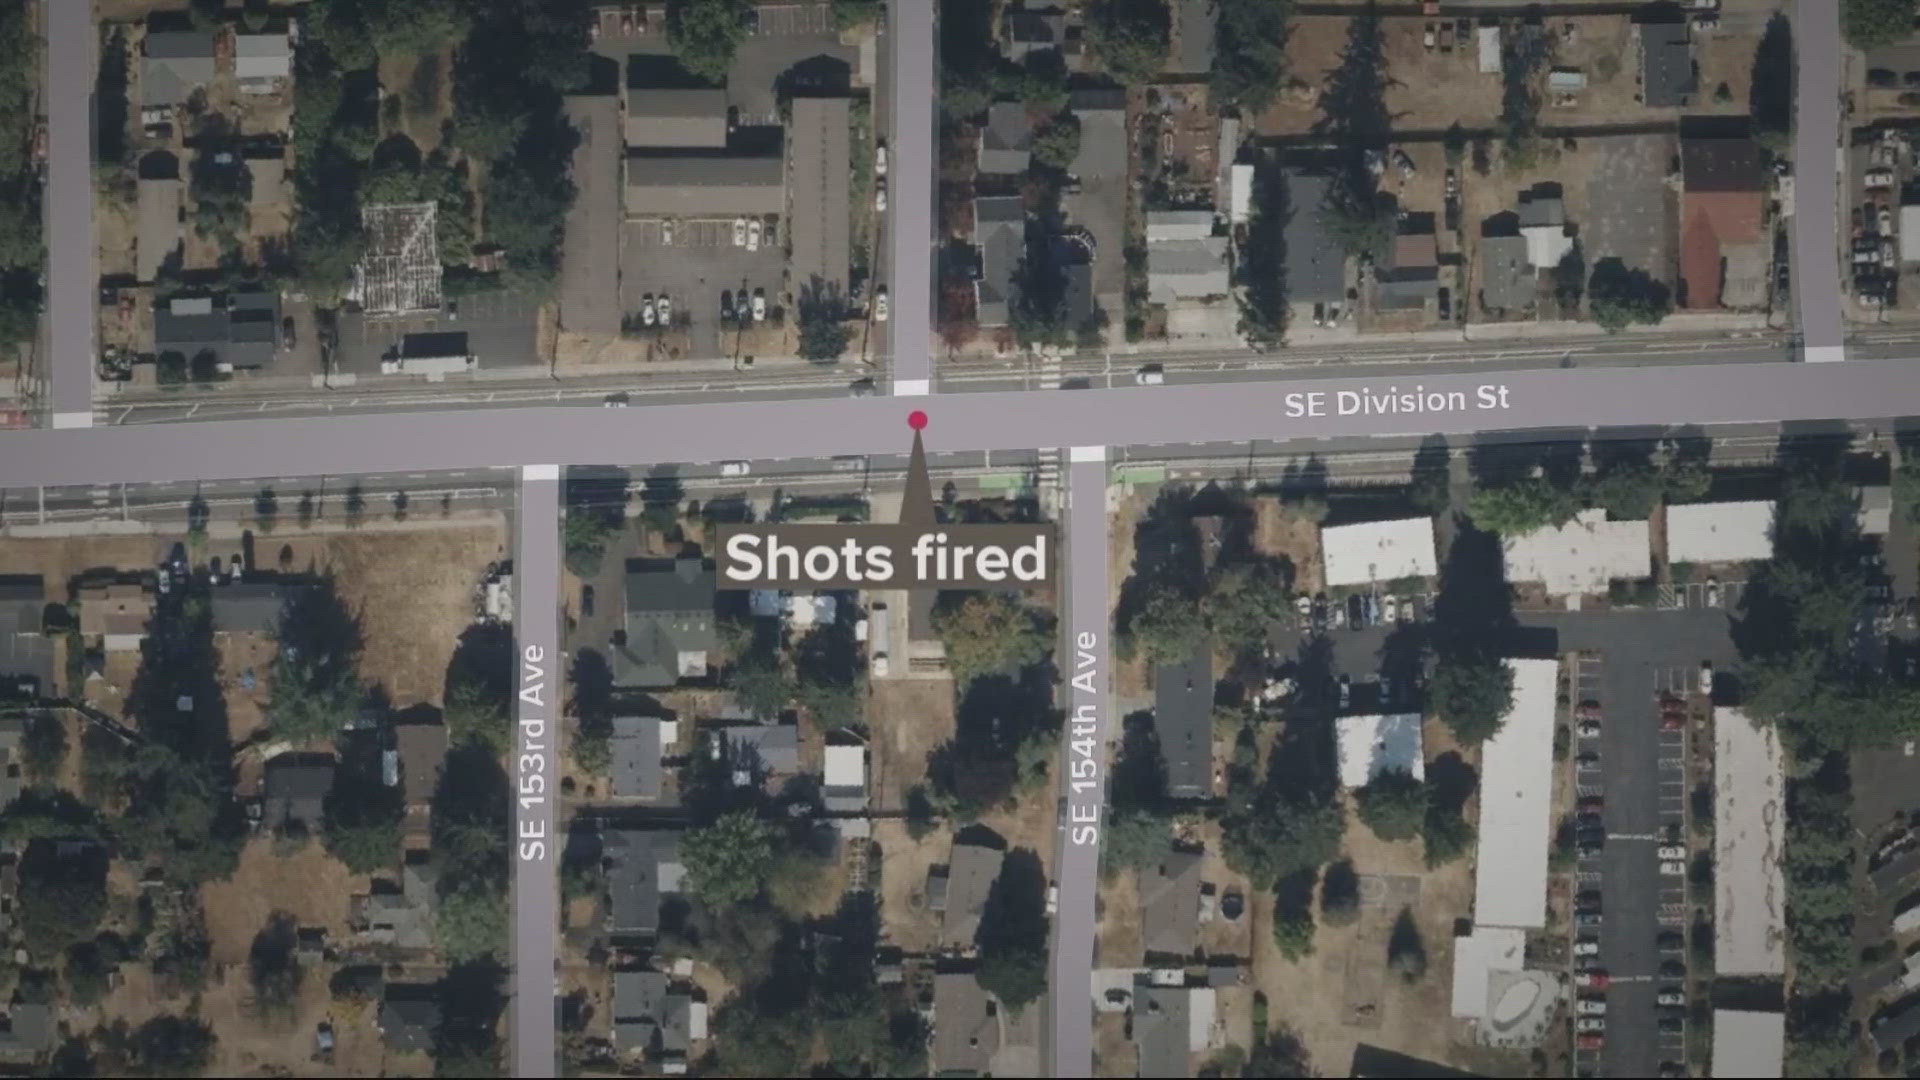 Portland police responded to many reports of shots fired near Southeast 154th Avenue and Division Street.